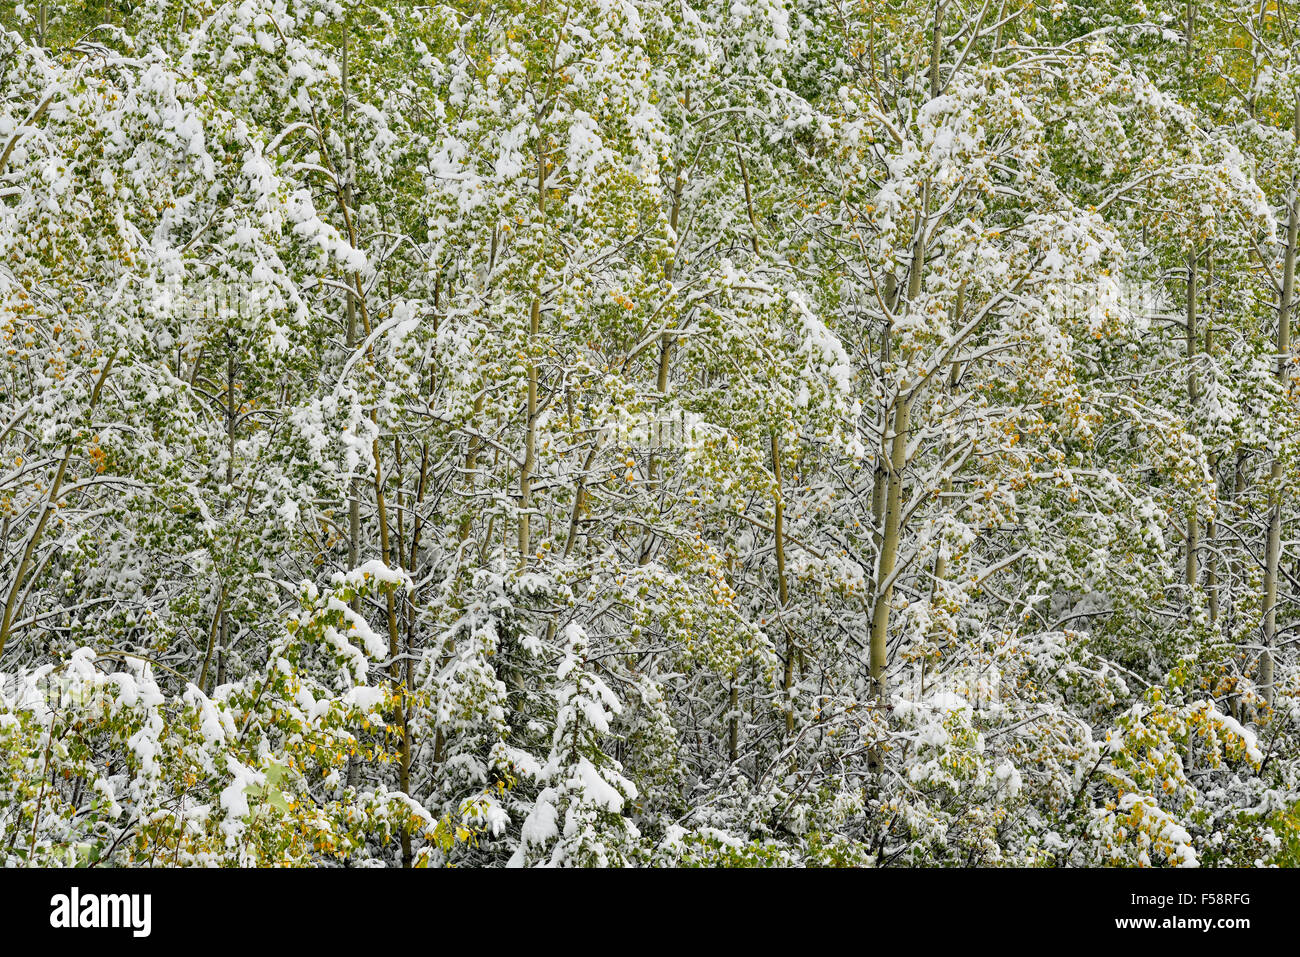 Conifer and aspen trees with wet snow in early September, Alaska Highway near Pink Mountain, British Columbia, Canada Stock Photo